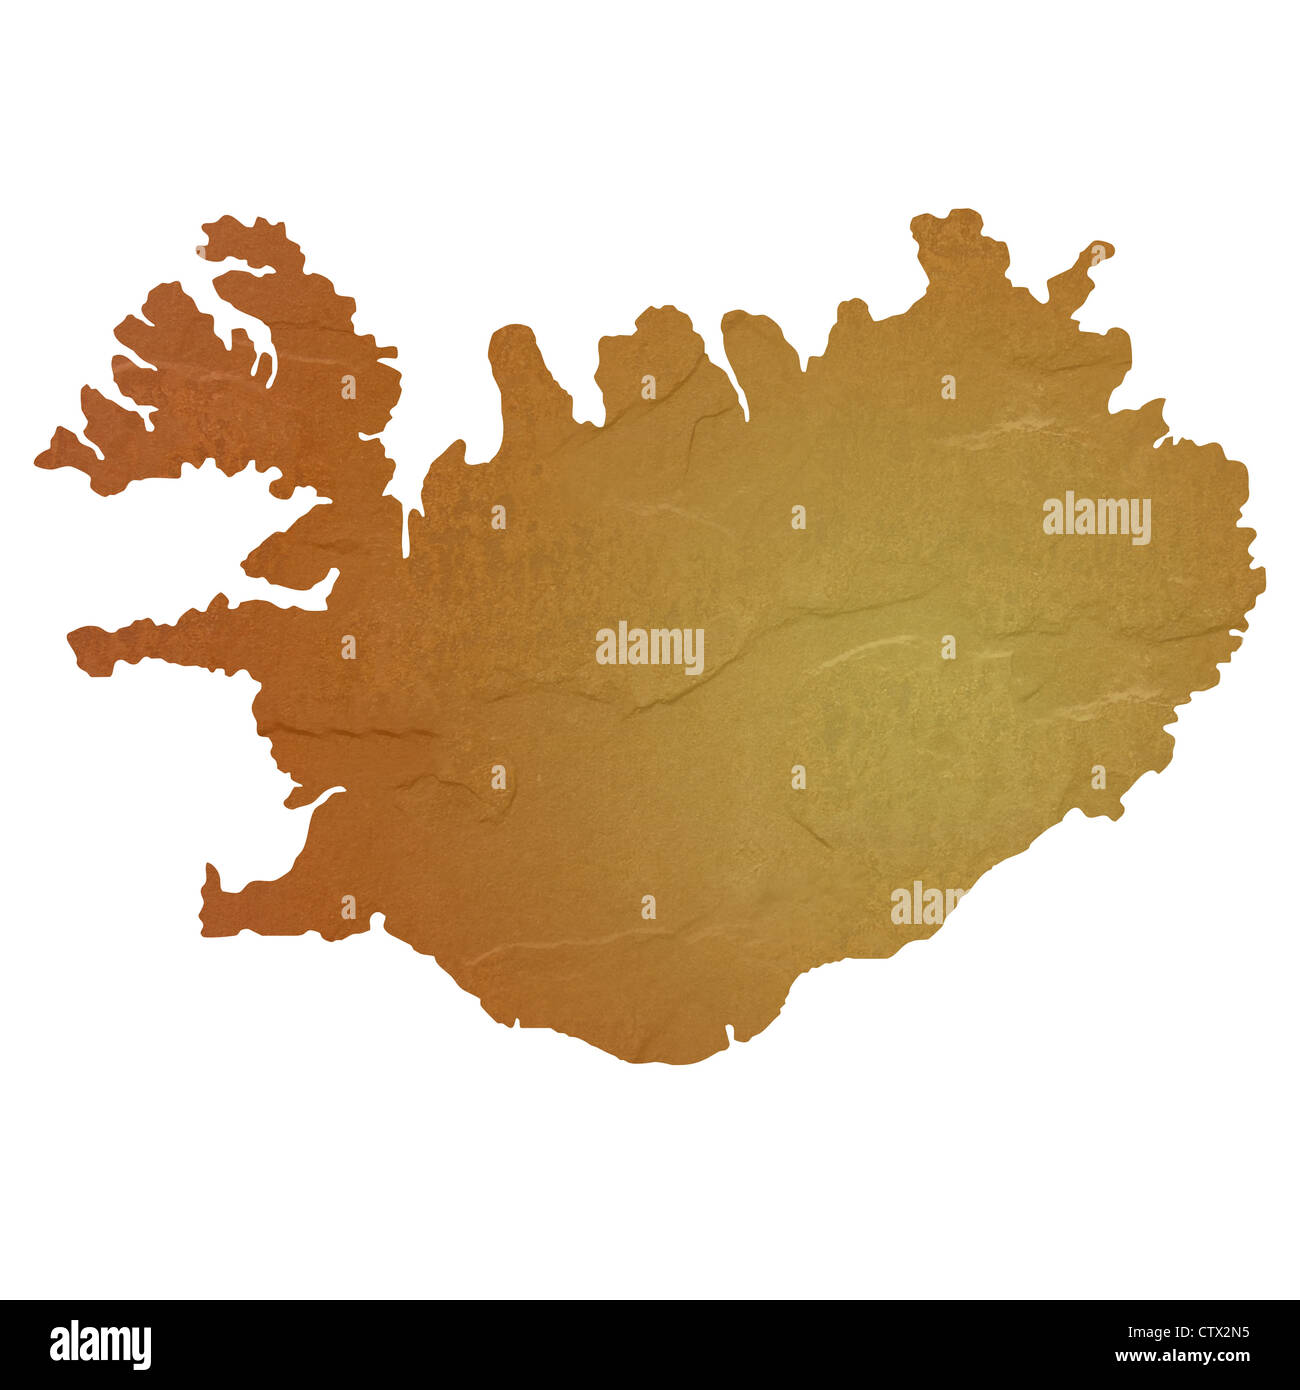 Textured map of Iceland map with brown rock or stone texture, isolated on white background with clipping path. Stock Photo